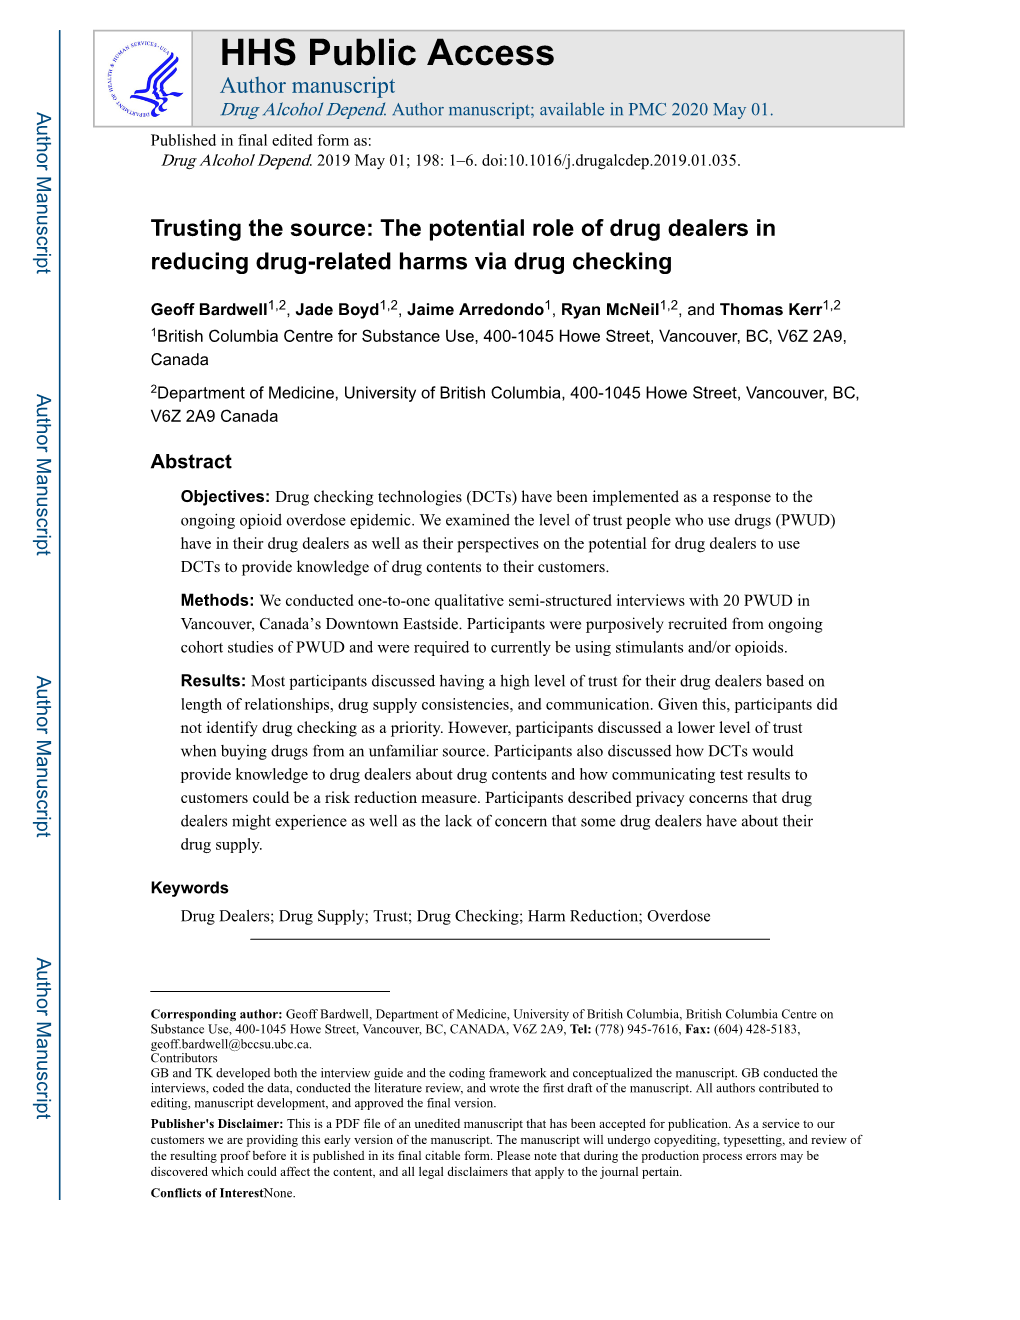 The Potential Role of Drug Dealers in Reducing Drug-Related Harms Via Drug Checking